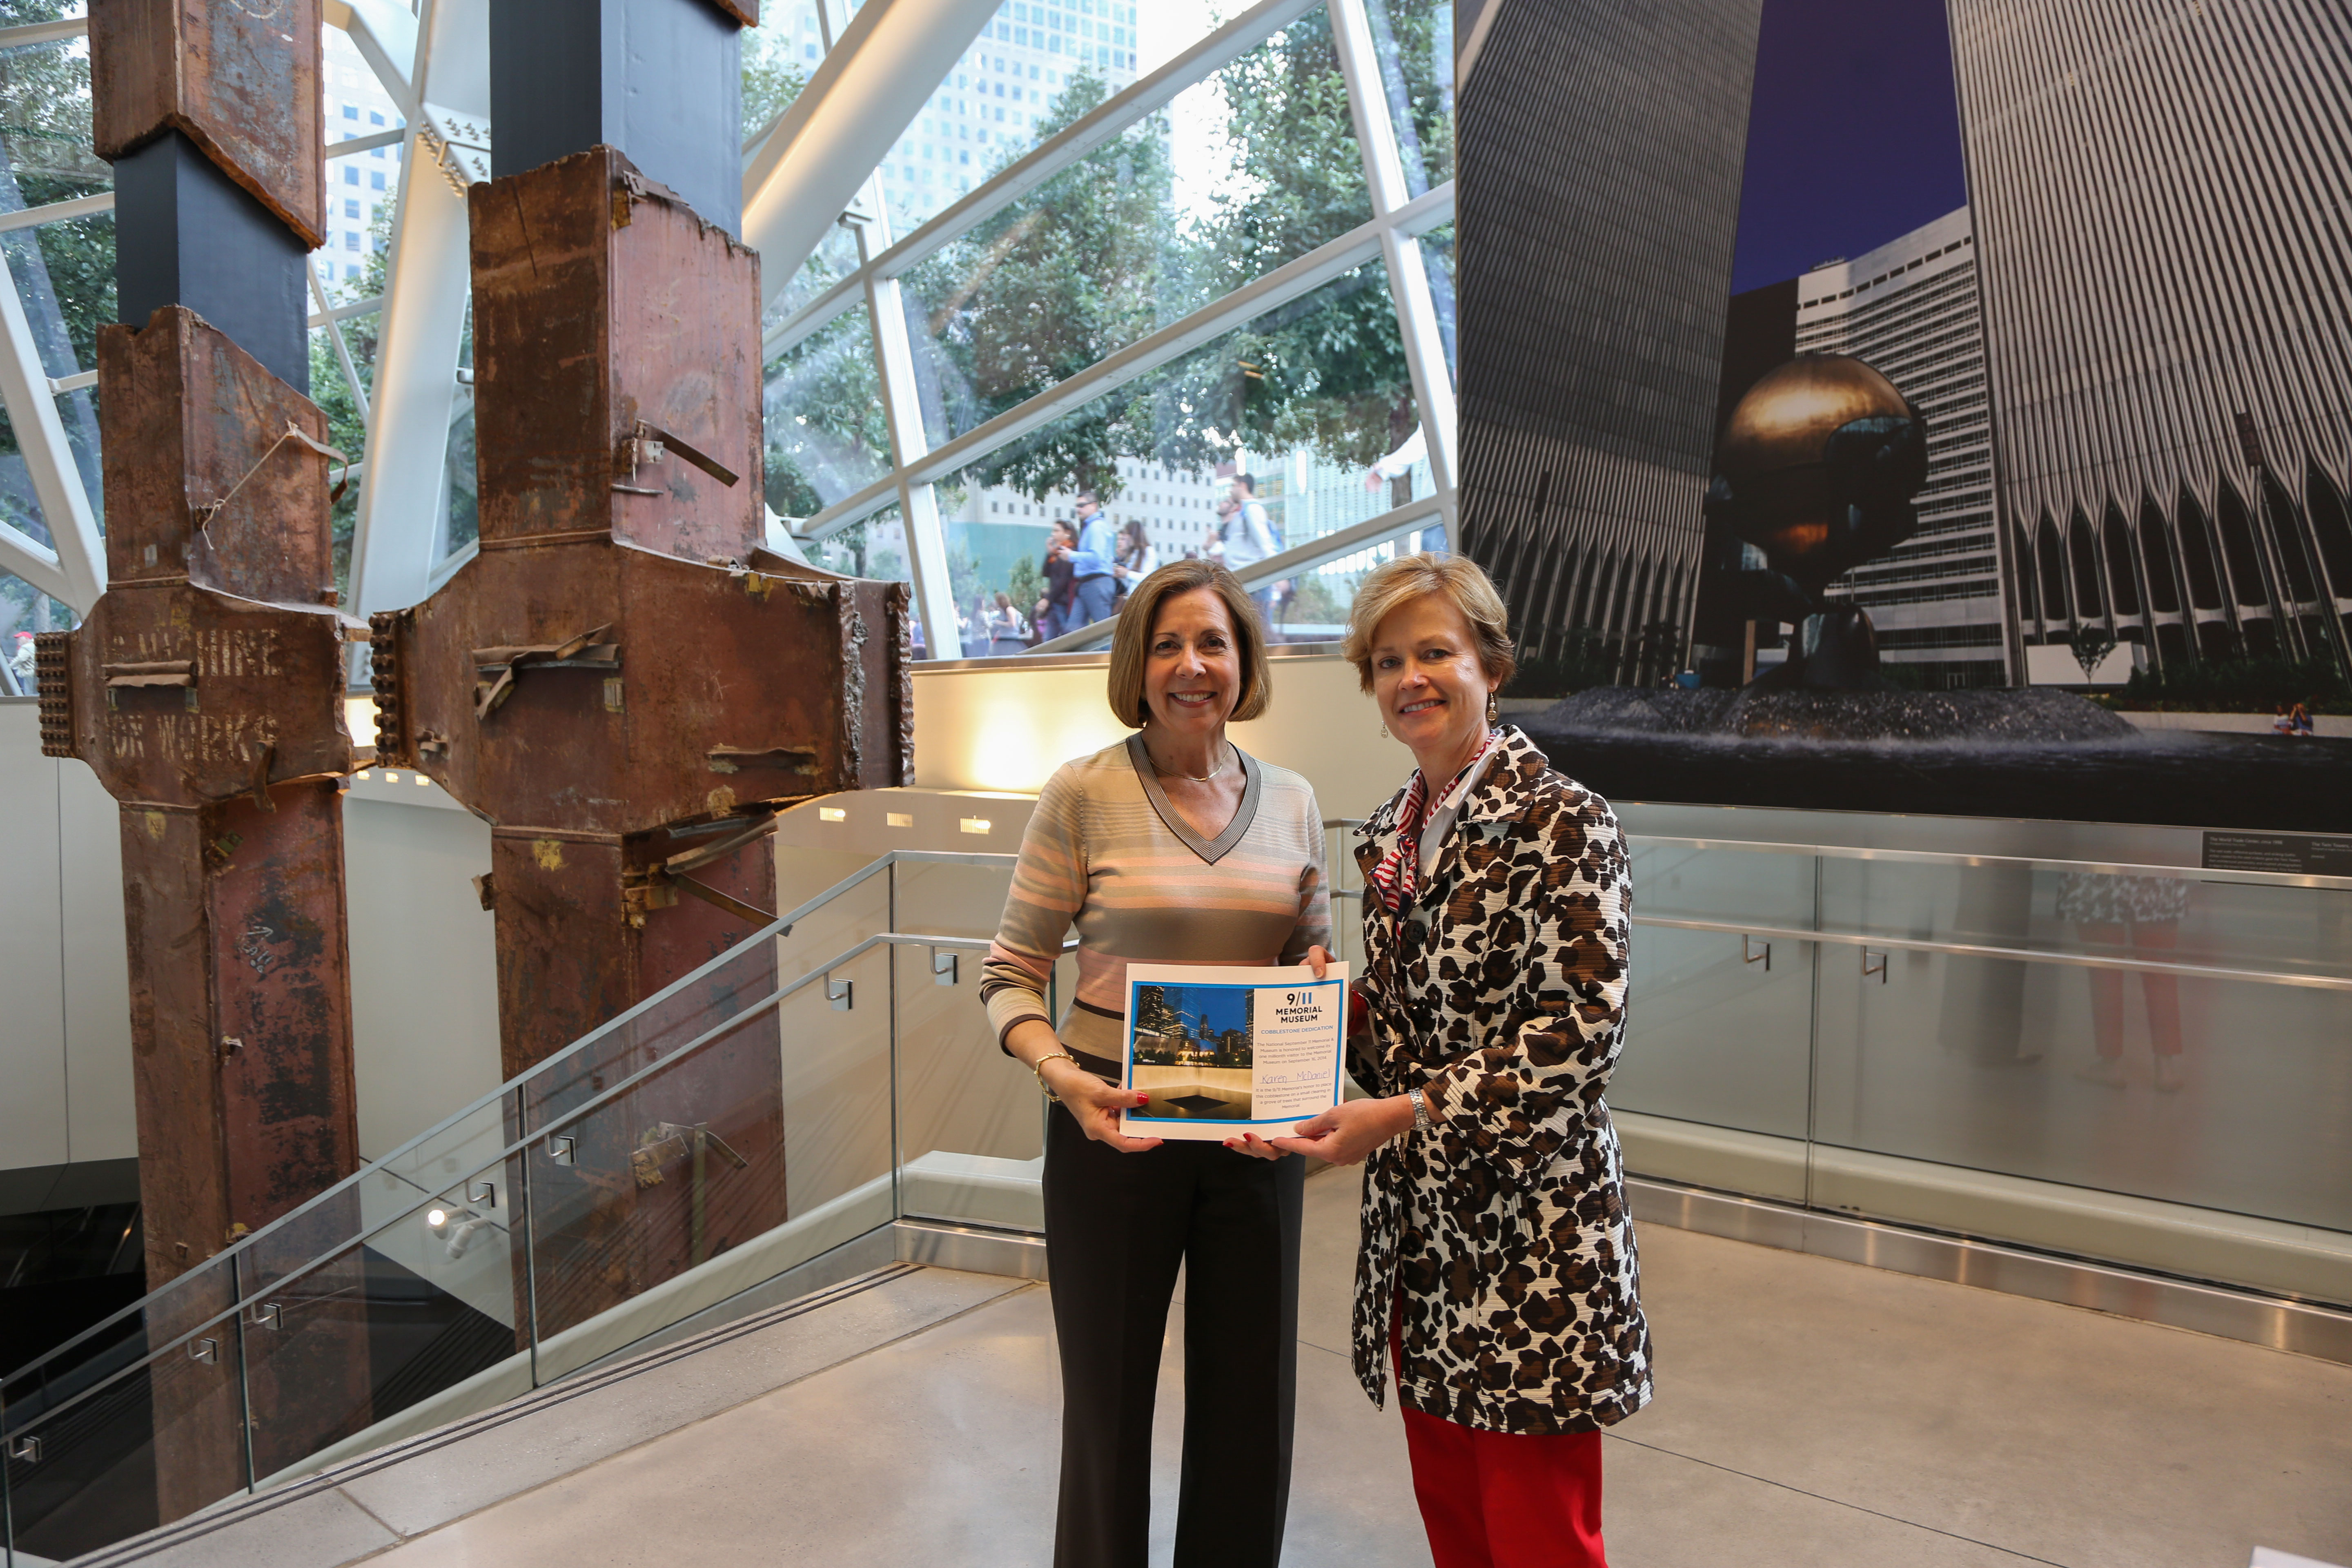 Karen McDaniel, the Museum’s one millionth visitors, stands with 9/11 Memorial Museum Director Alice Greenwald beside the tridents at the Museum.